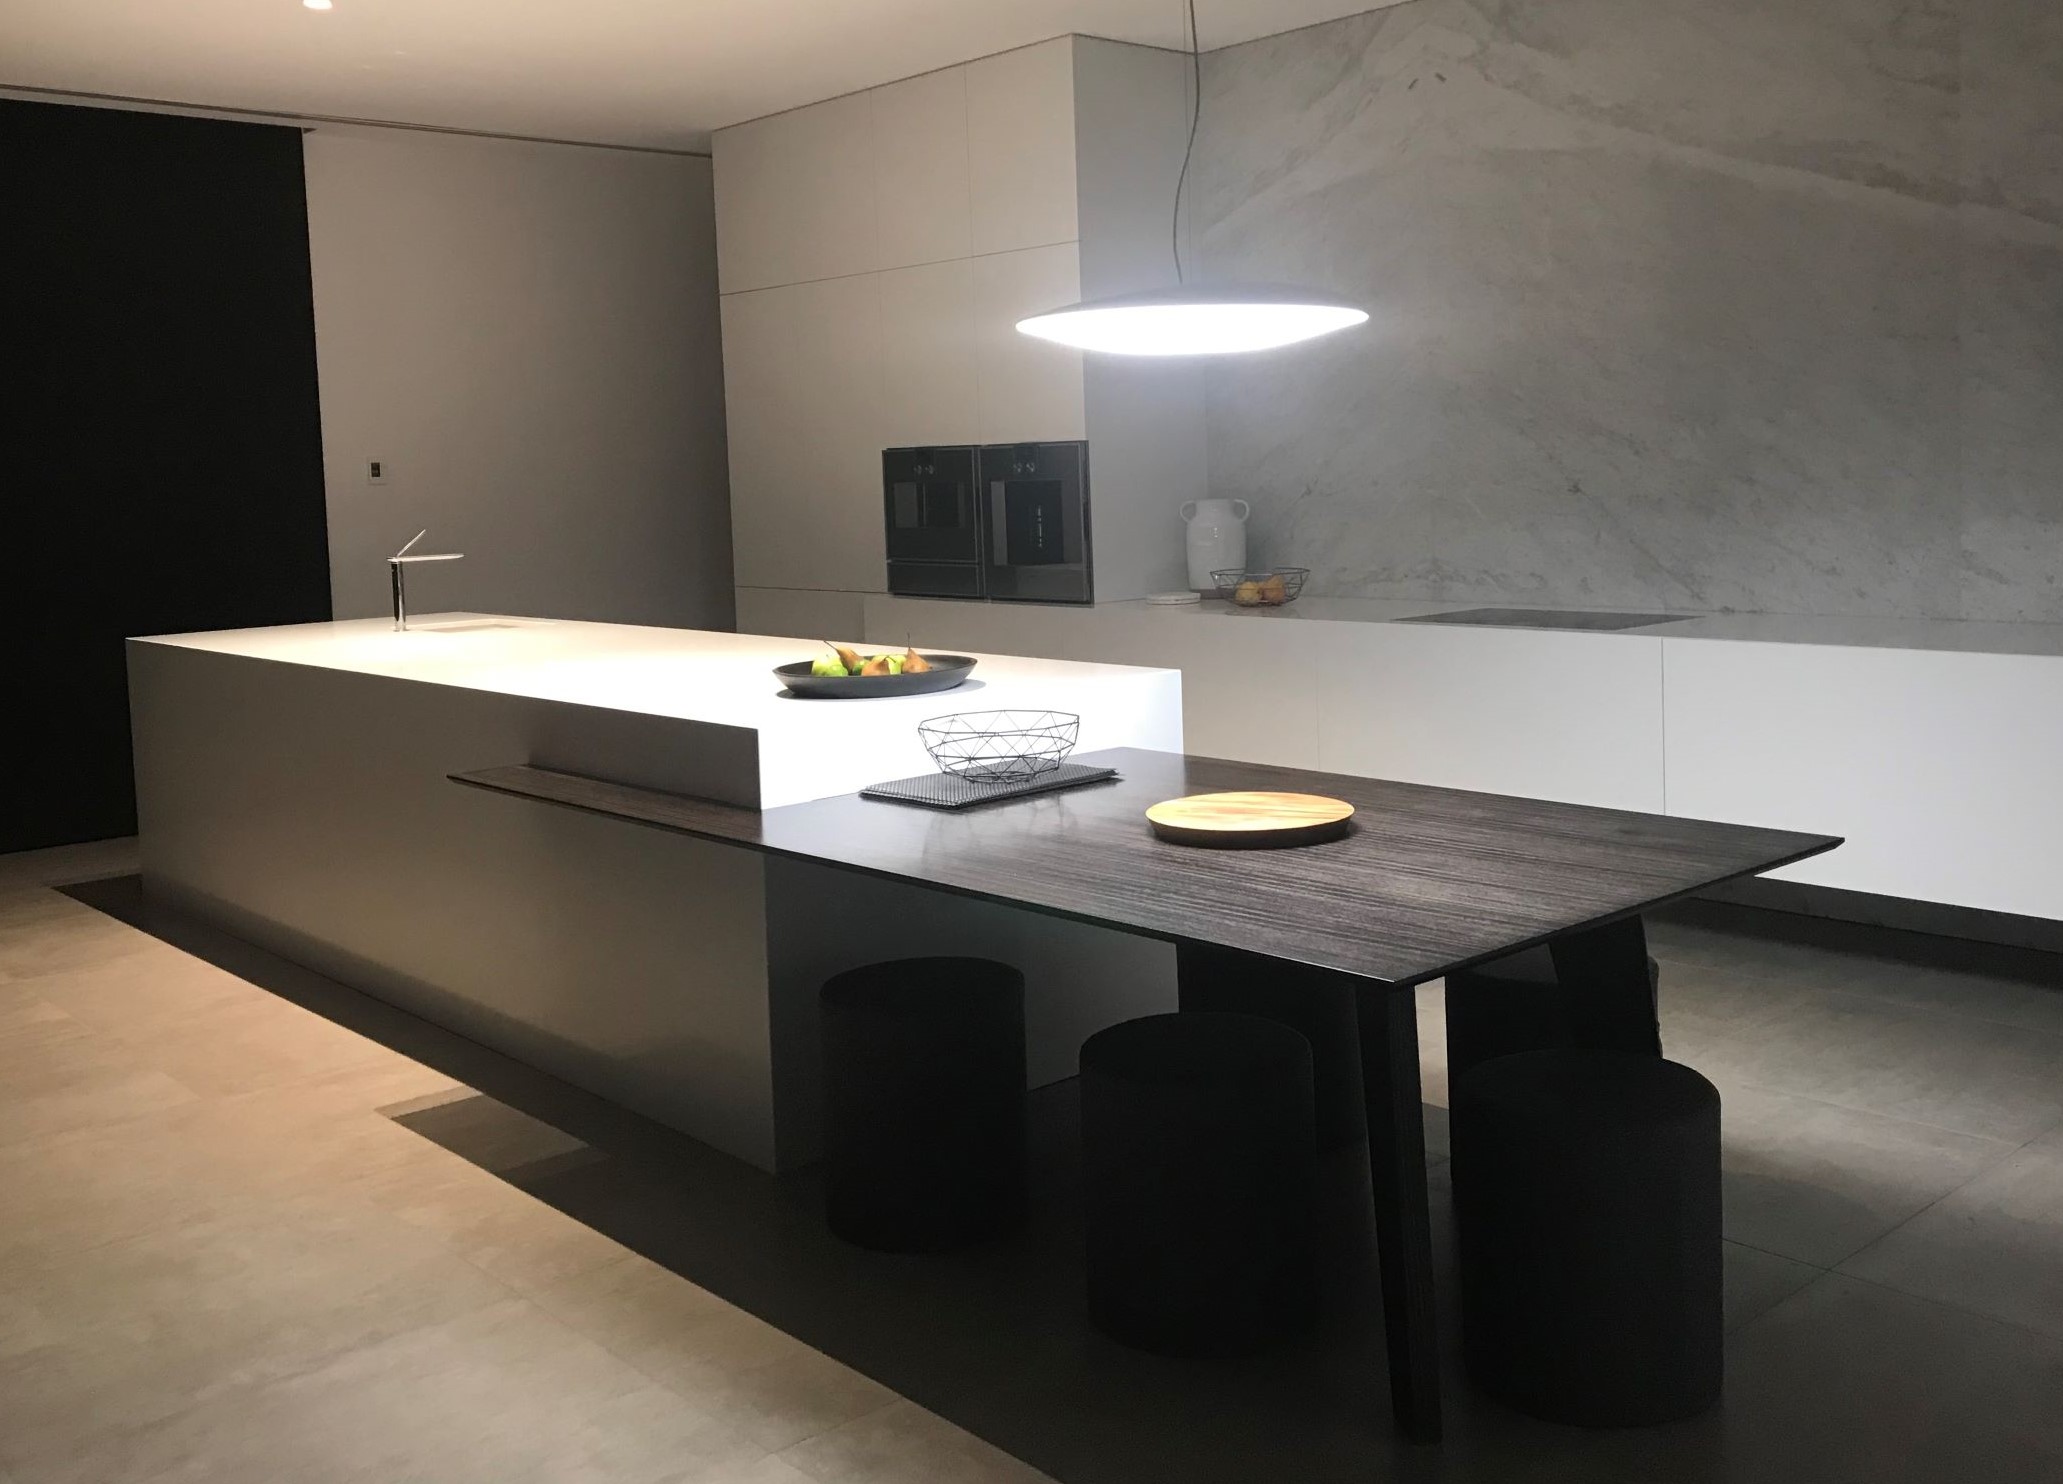 Stone bench top with wooden seating area and marble splashback. Large pendant light over benchspace